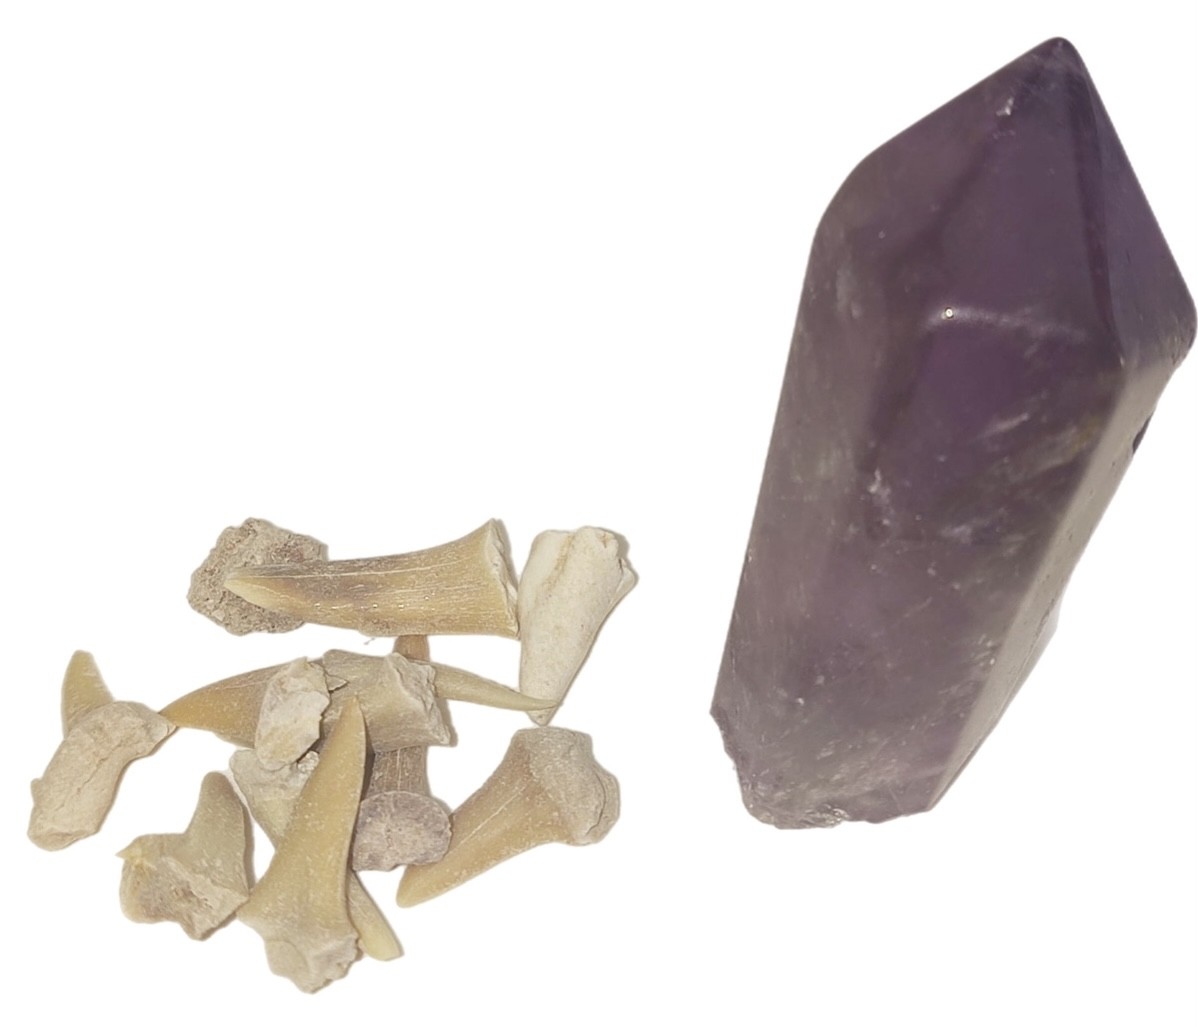 An Amethyst crystal and shark tooth from Morocco